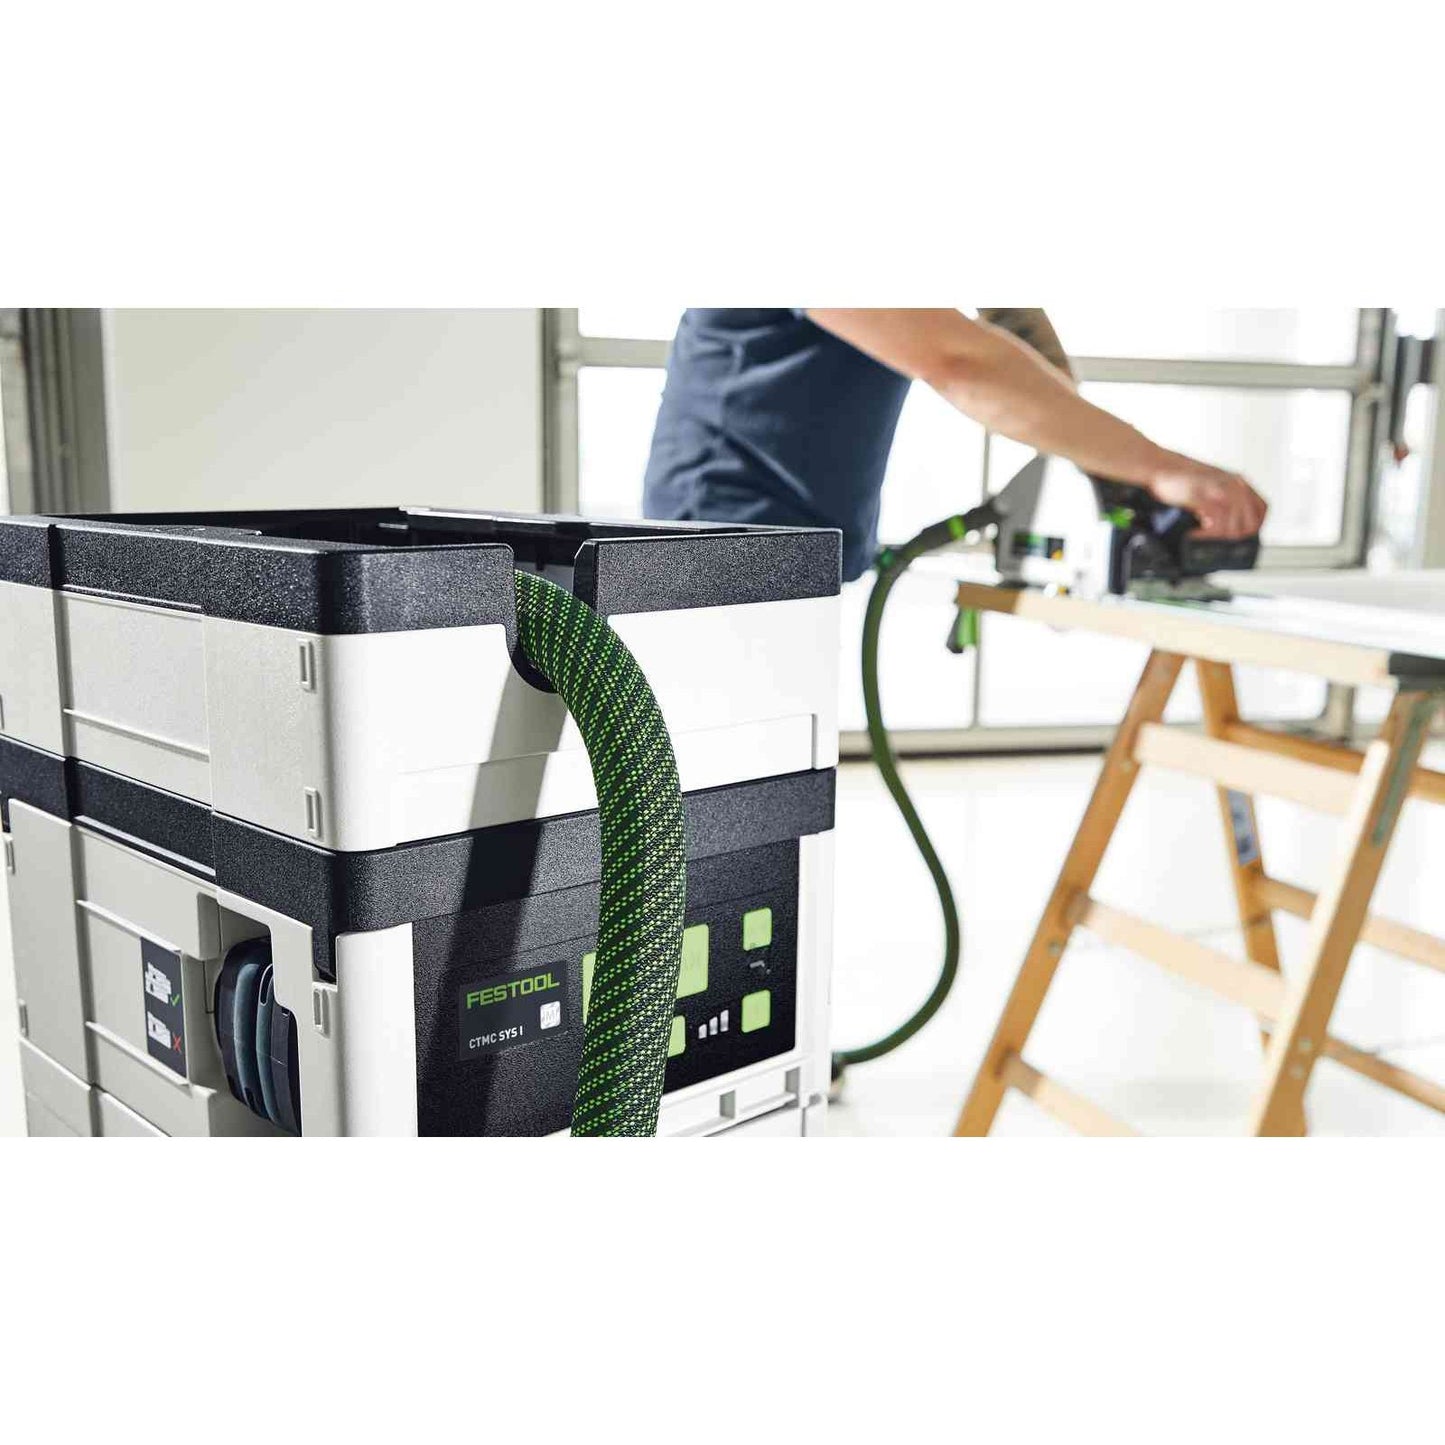 Festool Cordless Portable Dust Extractor CTLC SYS I 576936 tool-junction-nz